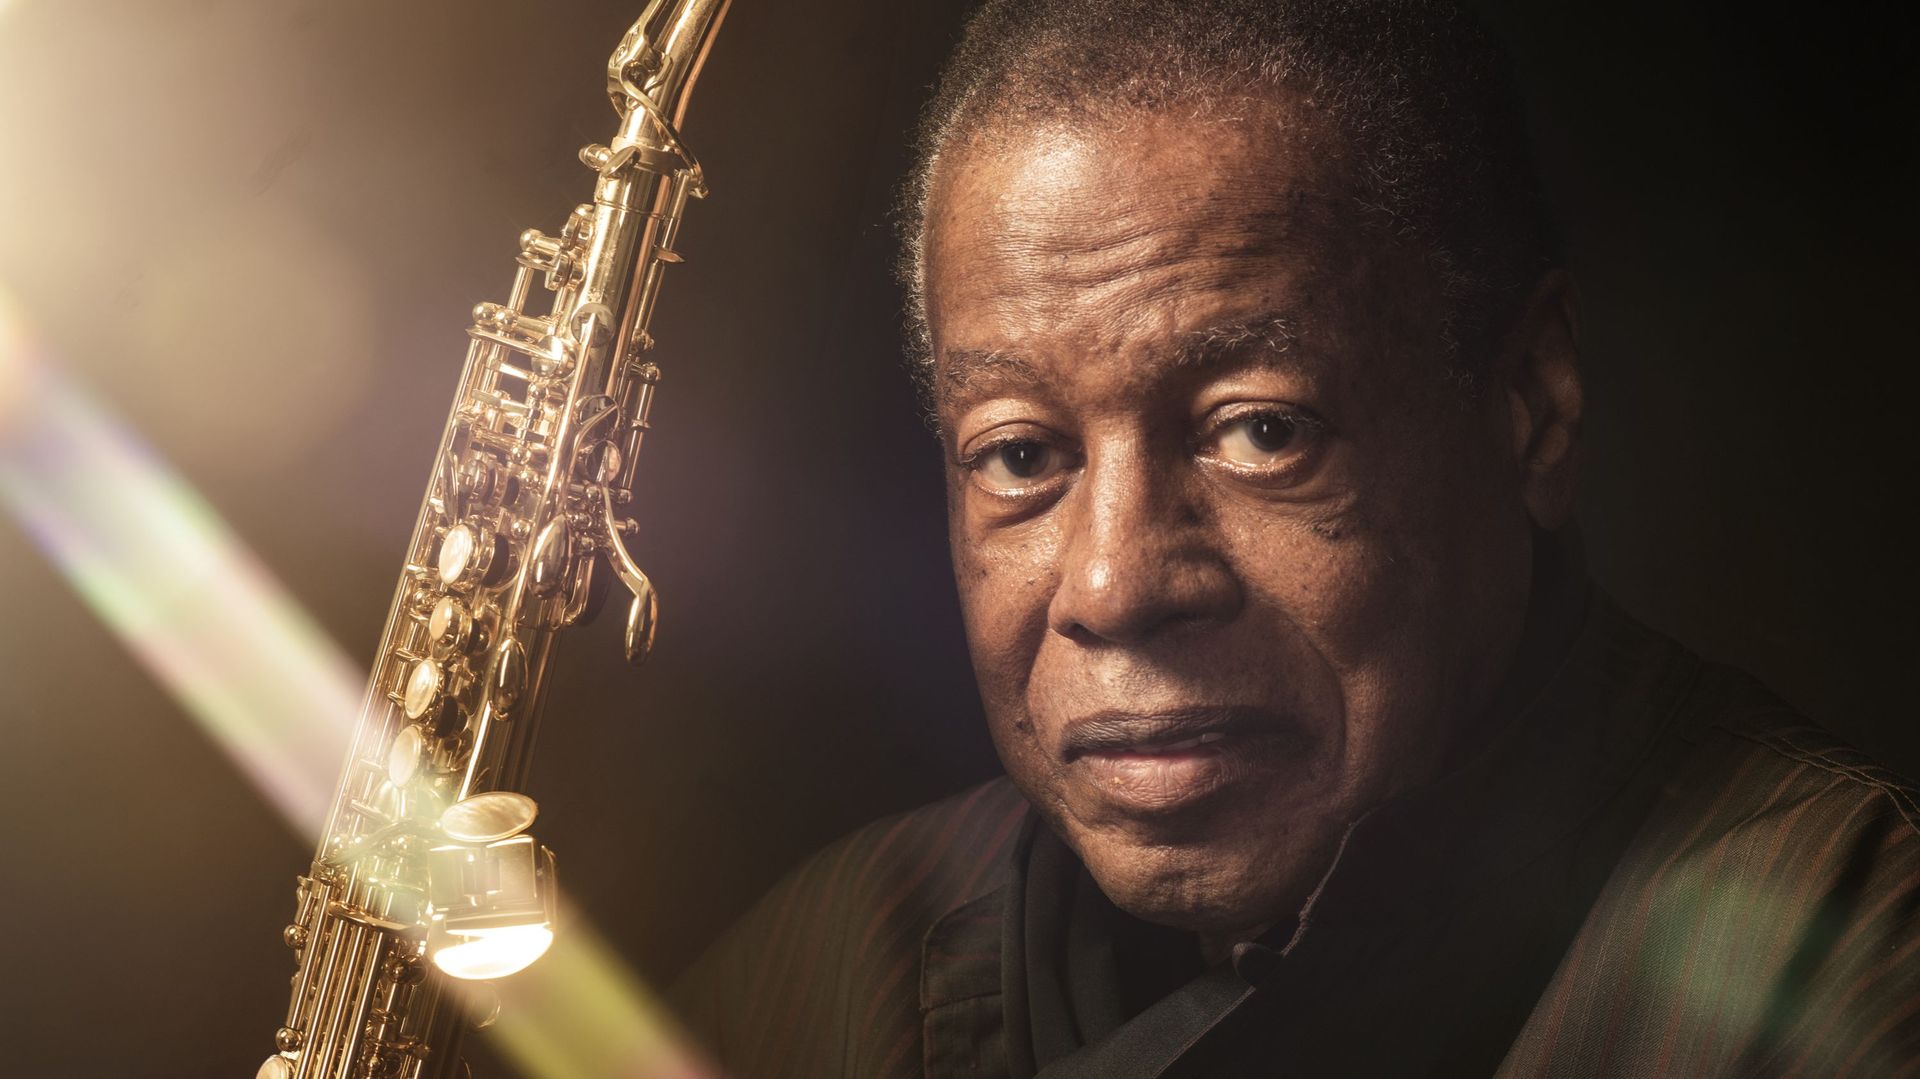 Jazz Musician and composer Wayne Shorter is a recipient of the 2018 Kennedy Center Honors.